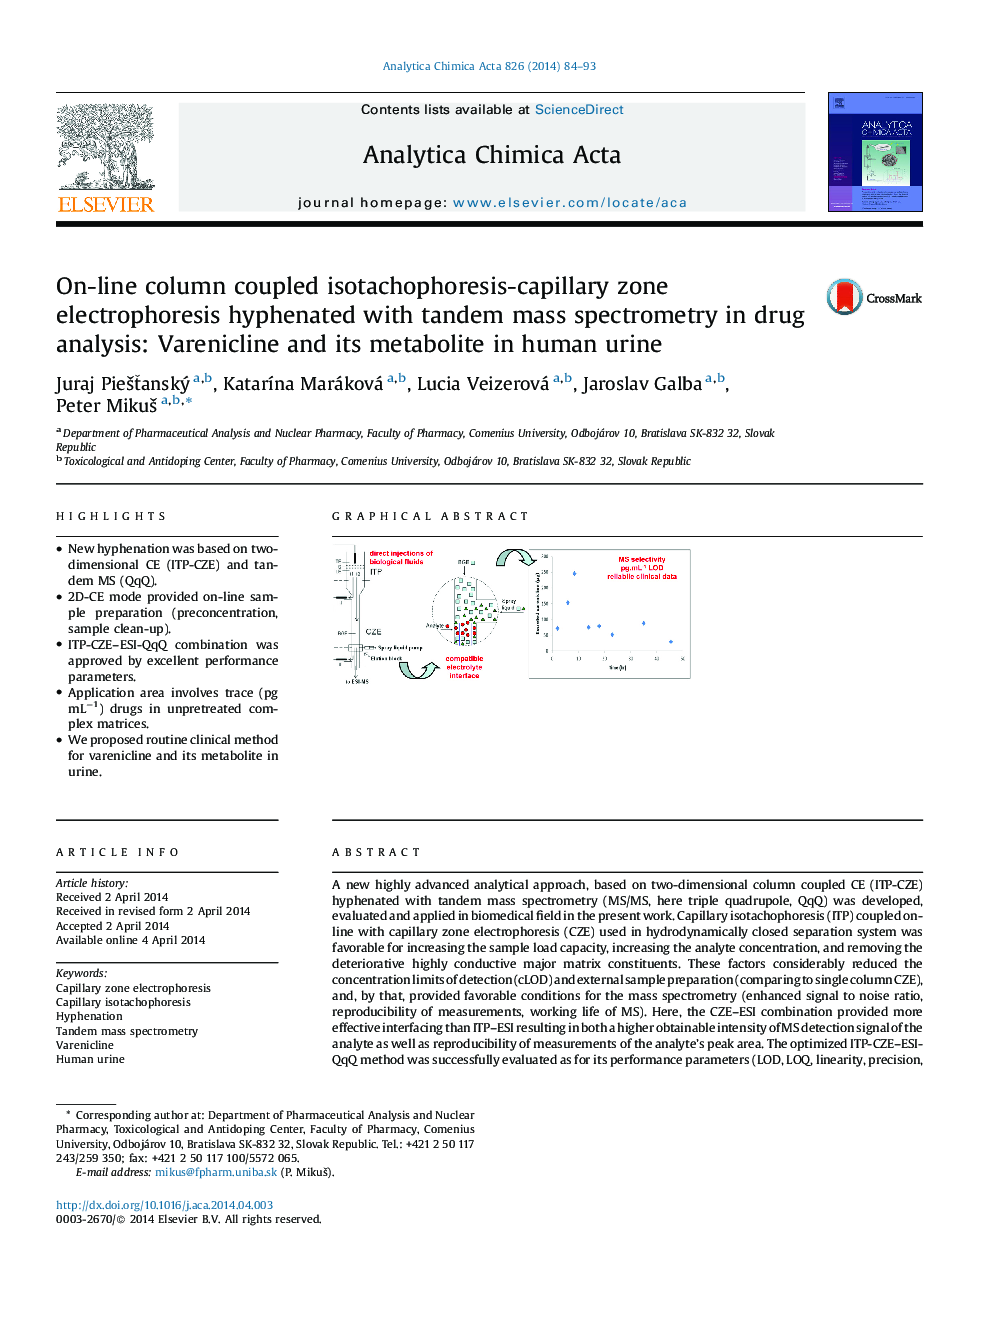 On-line column coupled isotachophoresis-capillary zone electrophoresis hyphenated with tandem mass spectrometry in drug analysis: Varenicline and its metabolite in human urine